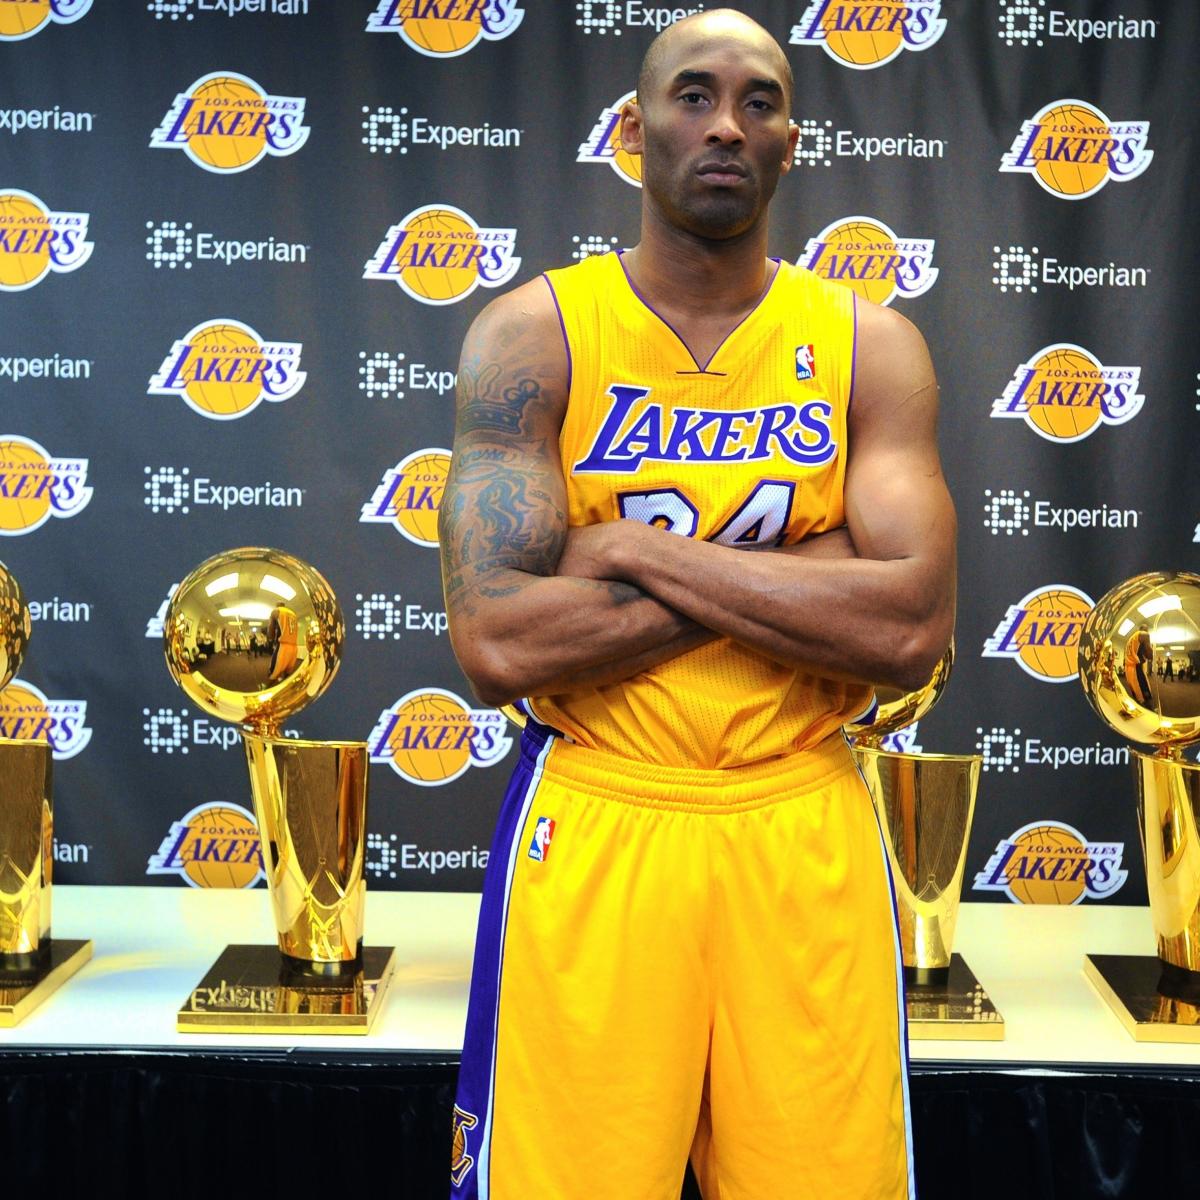 Kobe Bryant Launches New Company Kobe Inc. and Invests in Sports Drink | Bleacher ...1200 x 1200